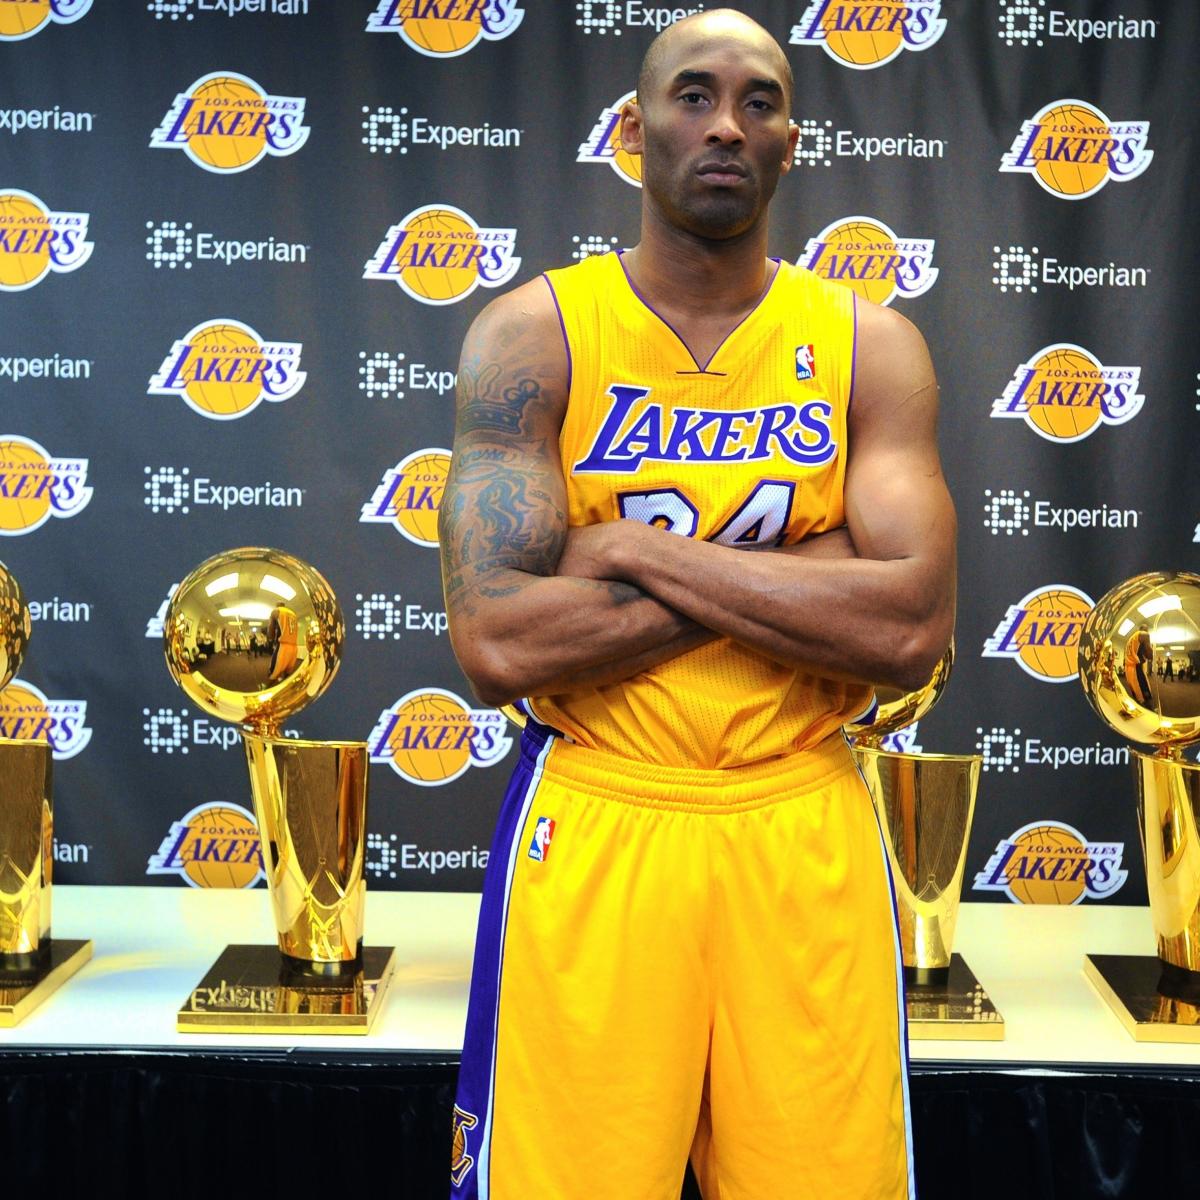 Kobe Bryant Launches New Company Kobe Inc. and Invests in Sports Drink | Bleacher ...1200 x 1200